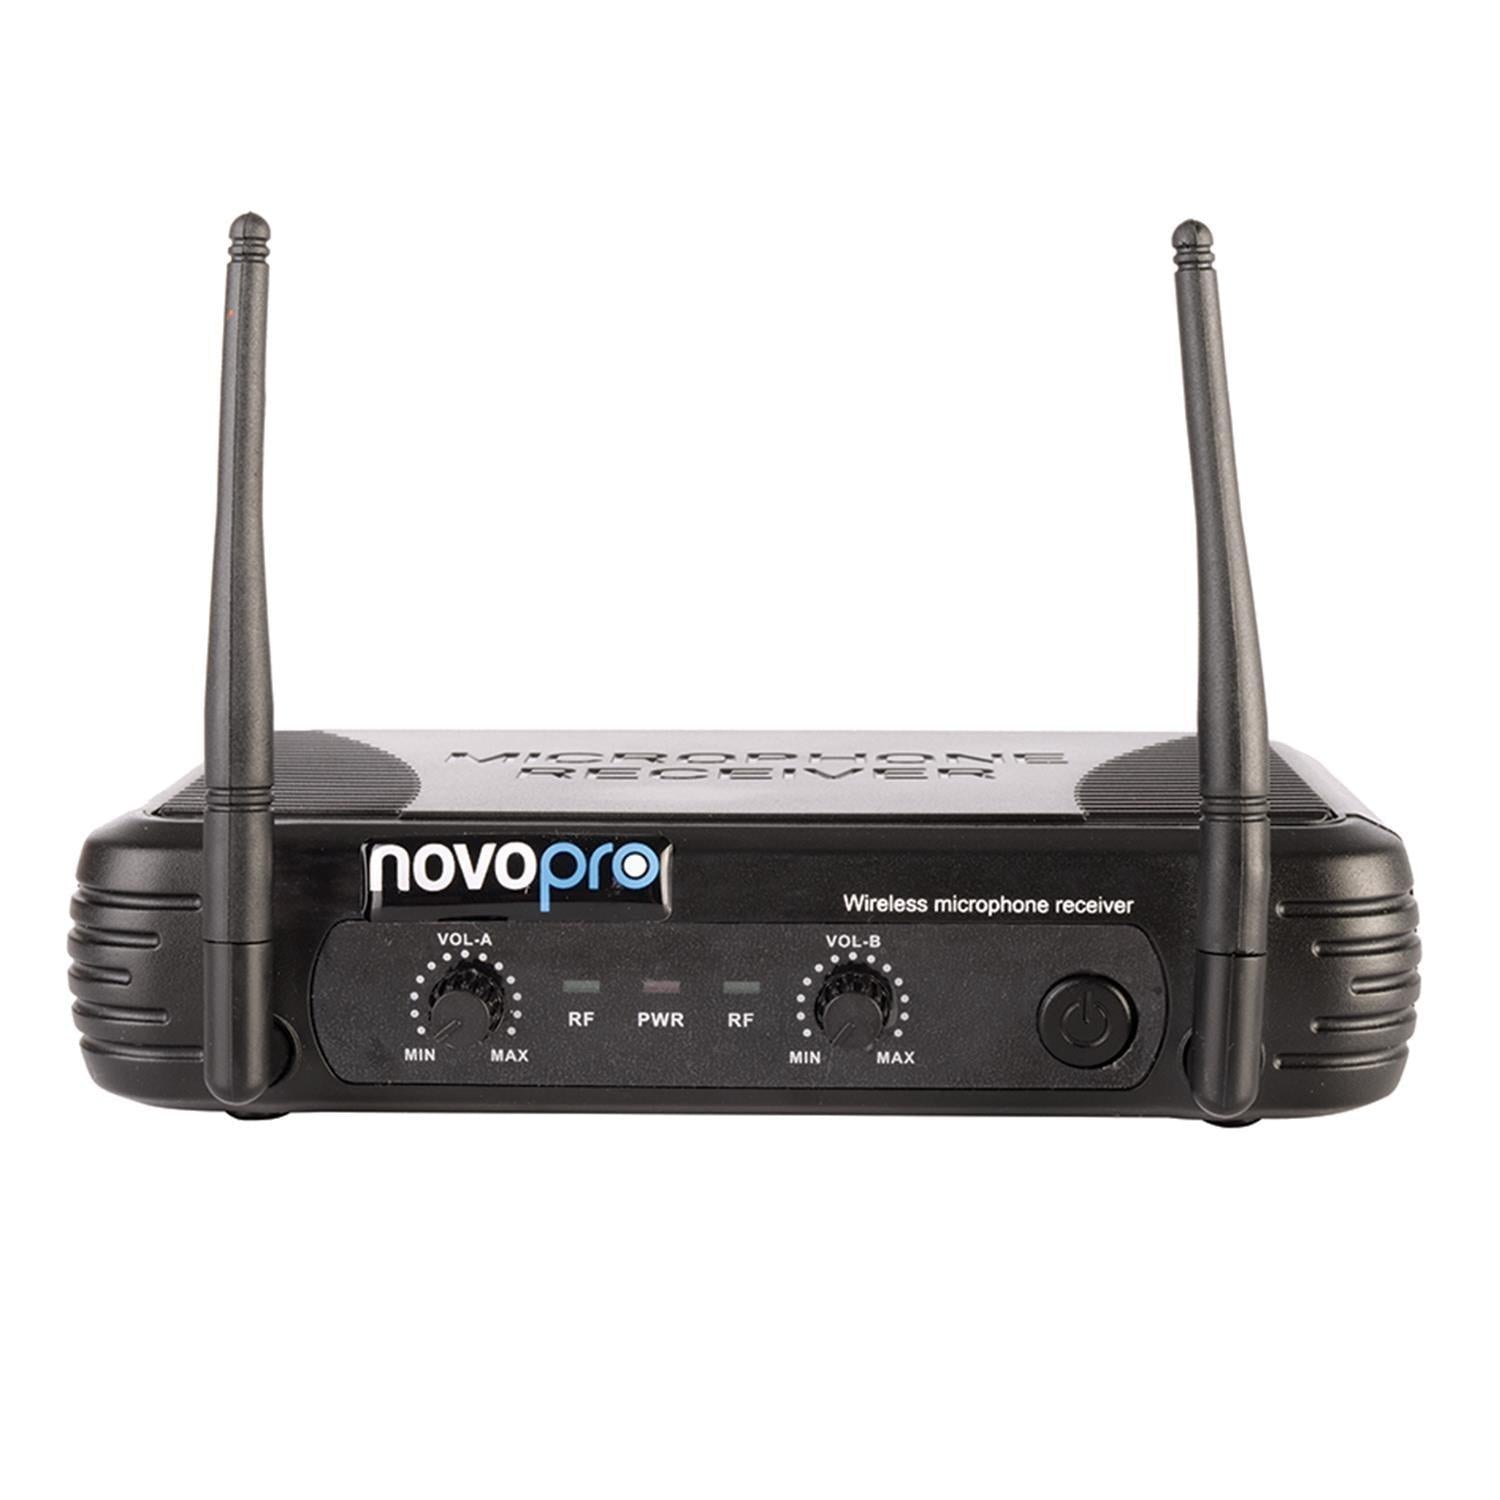 Novopro V20 Twin handheld VHF microphone system - DY Pro Audio